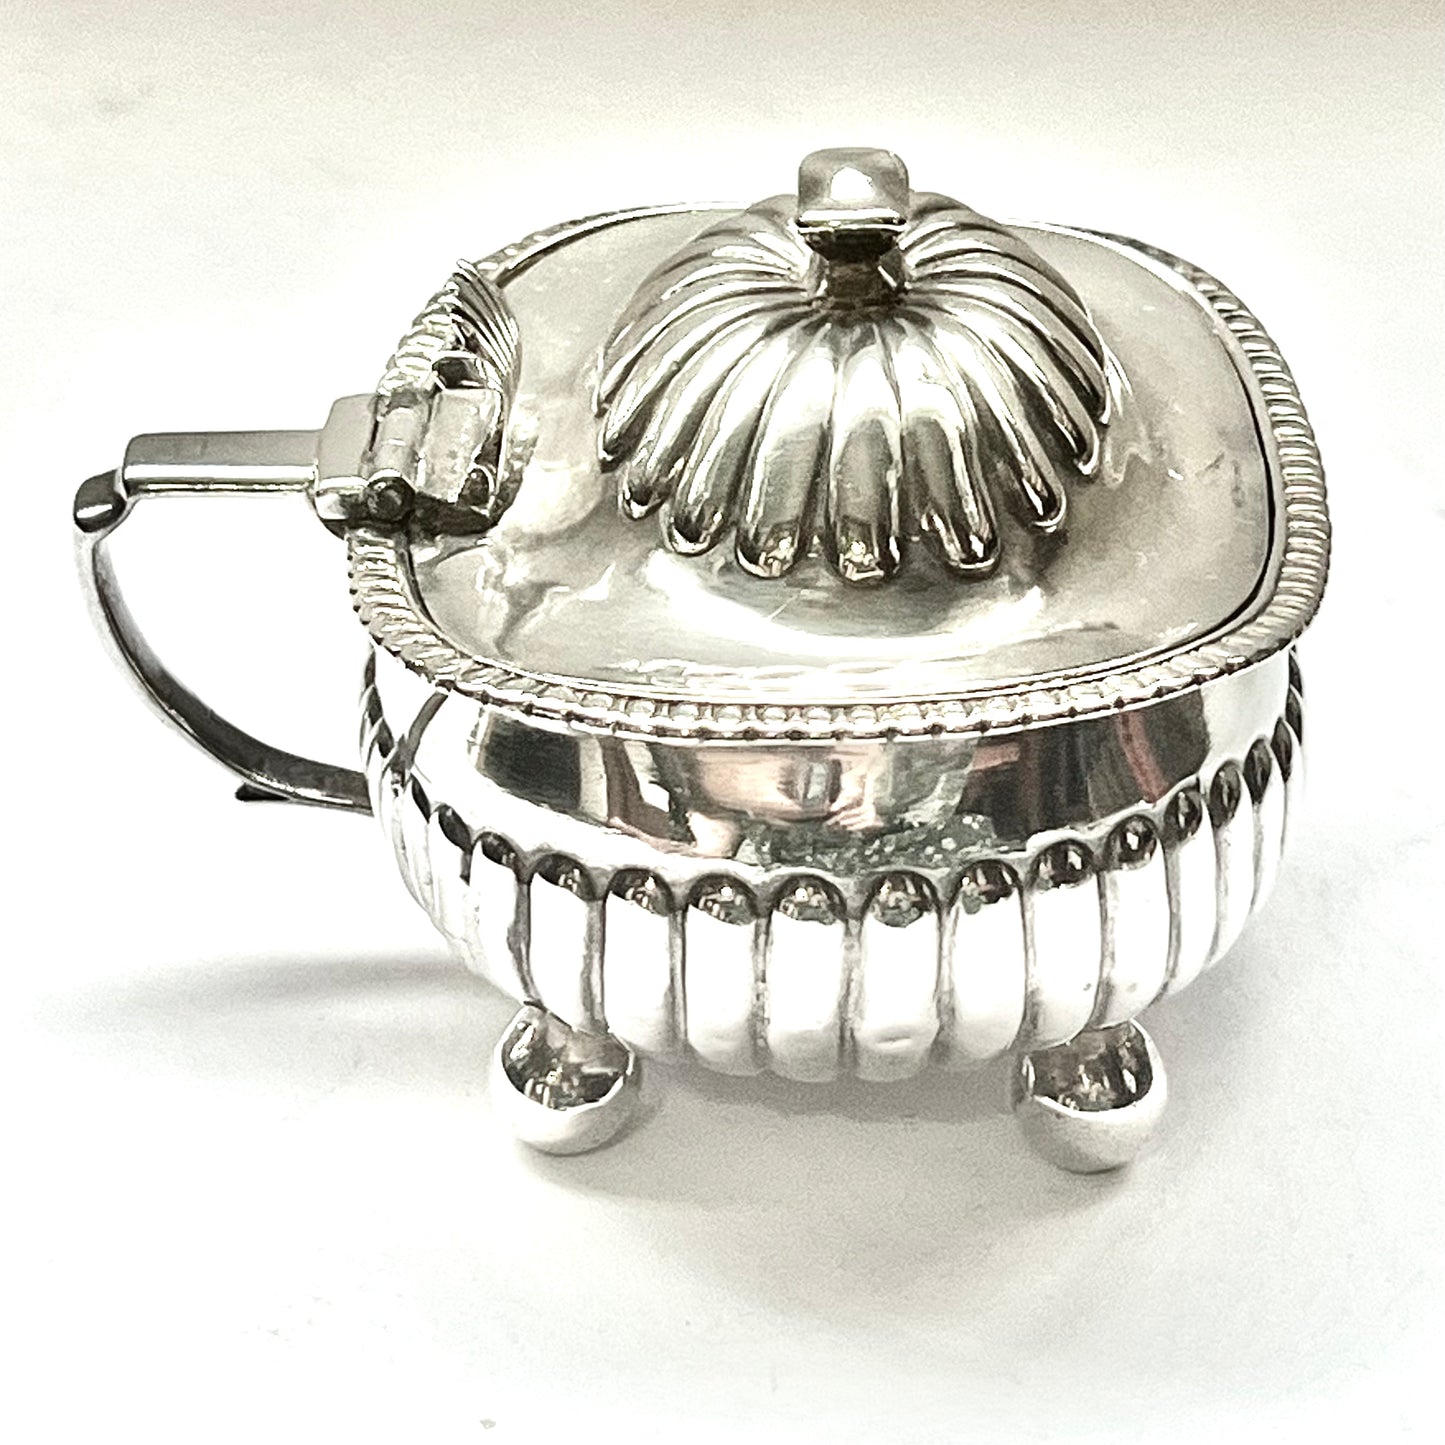 Large George III crested sterling silver mustard pot, with marks for John Lias, 1809, London